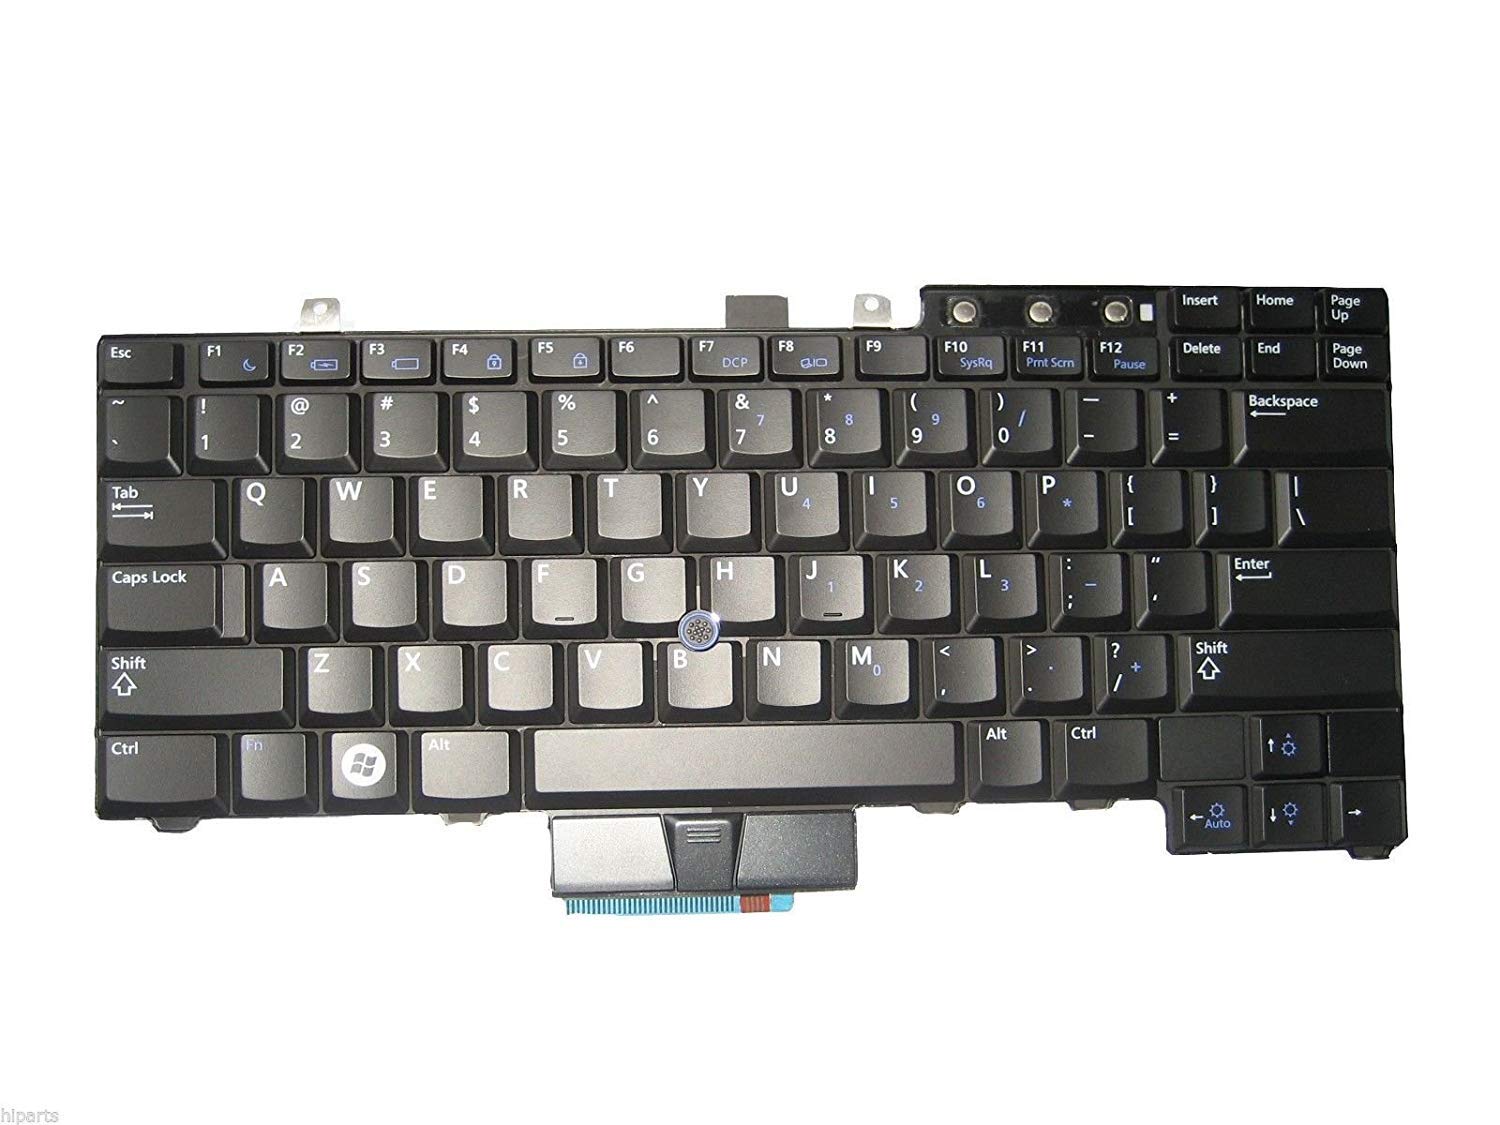 A picture of a malfunctioning Dell Latitude E6410 keyboard.